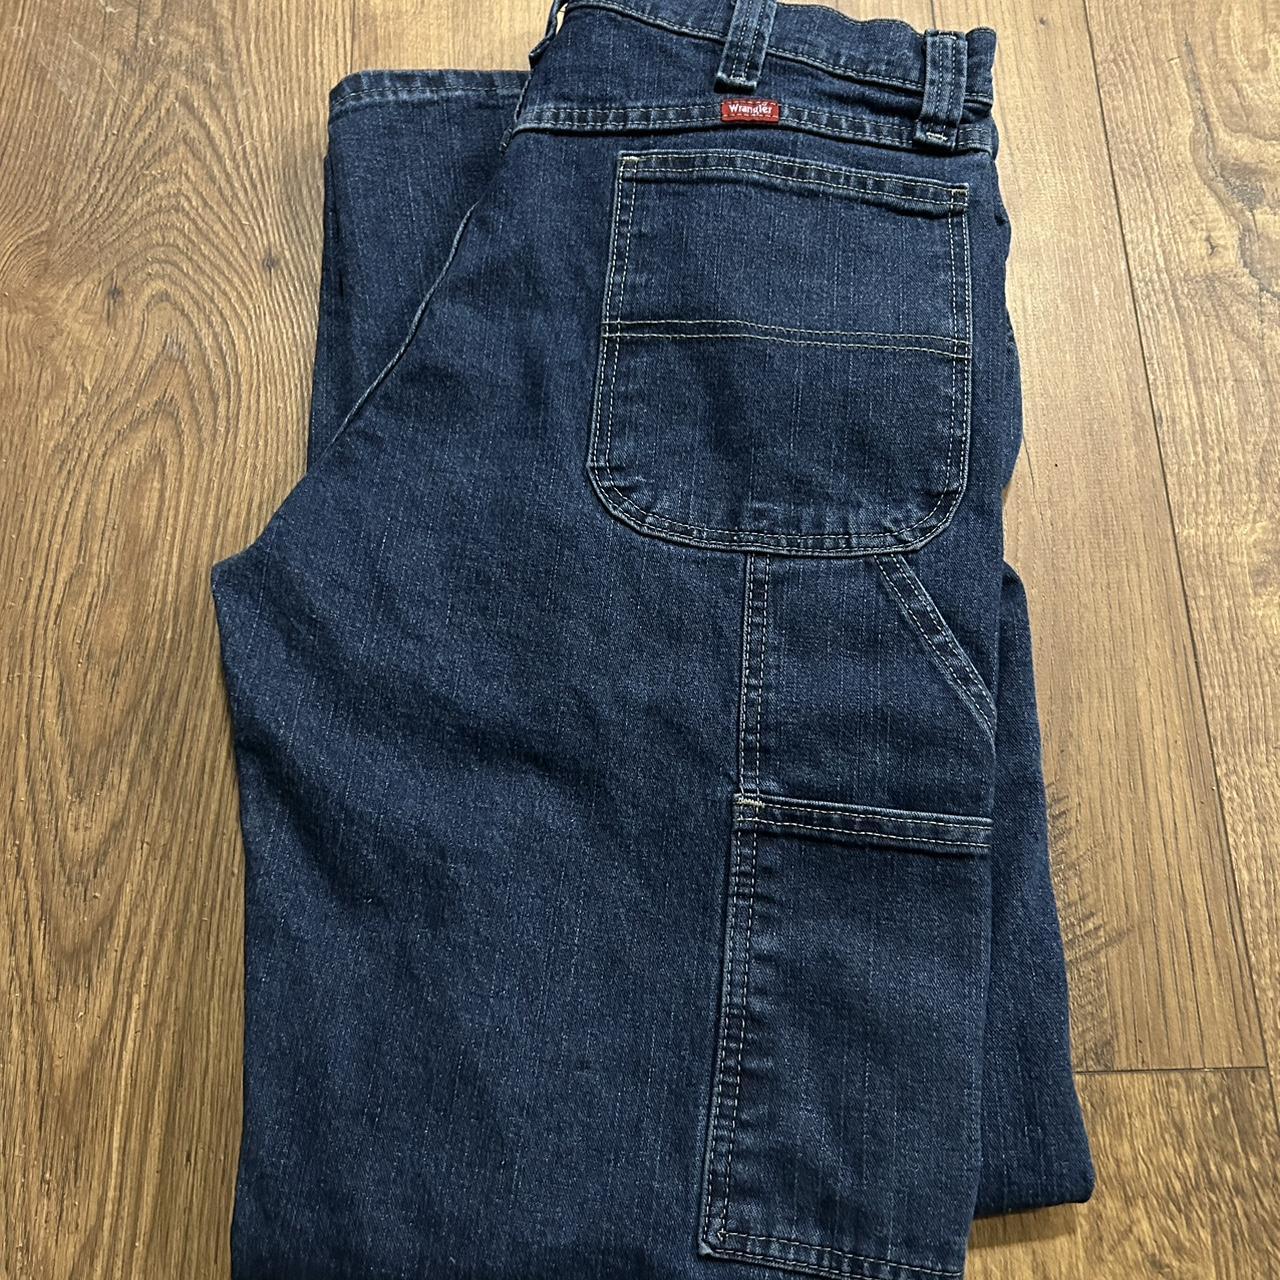 Baggy brand new blue wrangler jeans, never worn and... - Depop